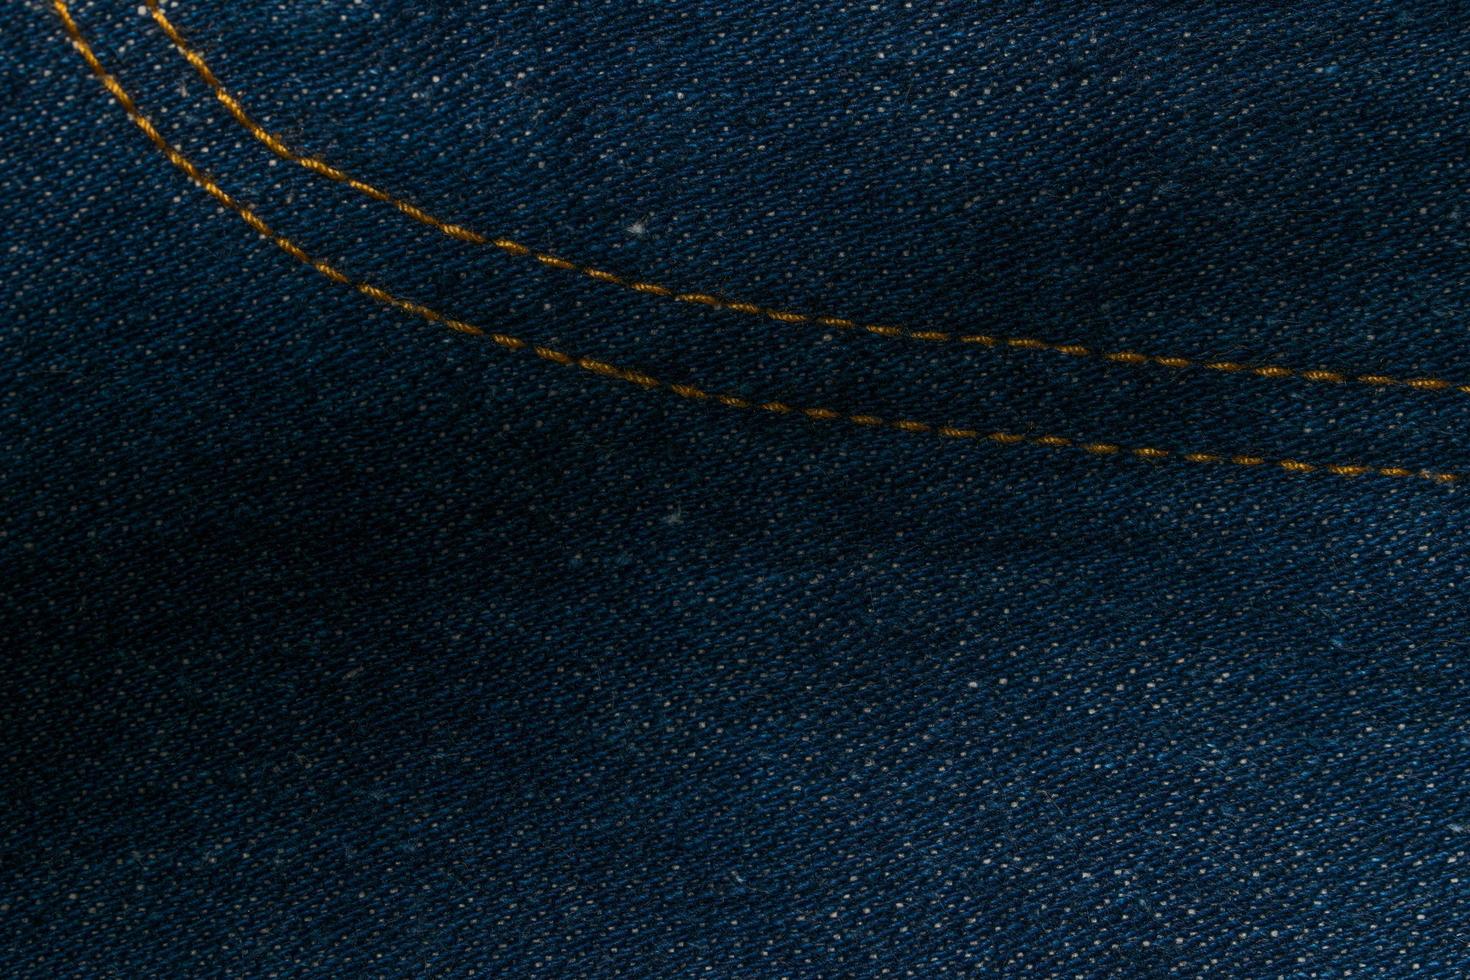 Jeans fabric close-up photo